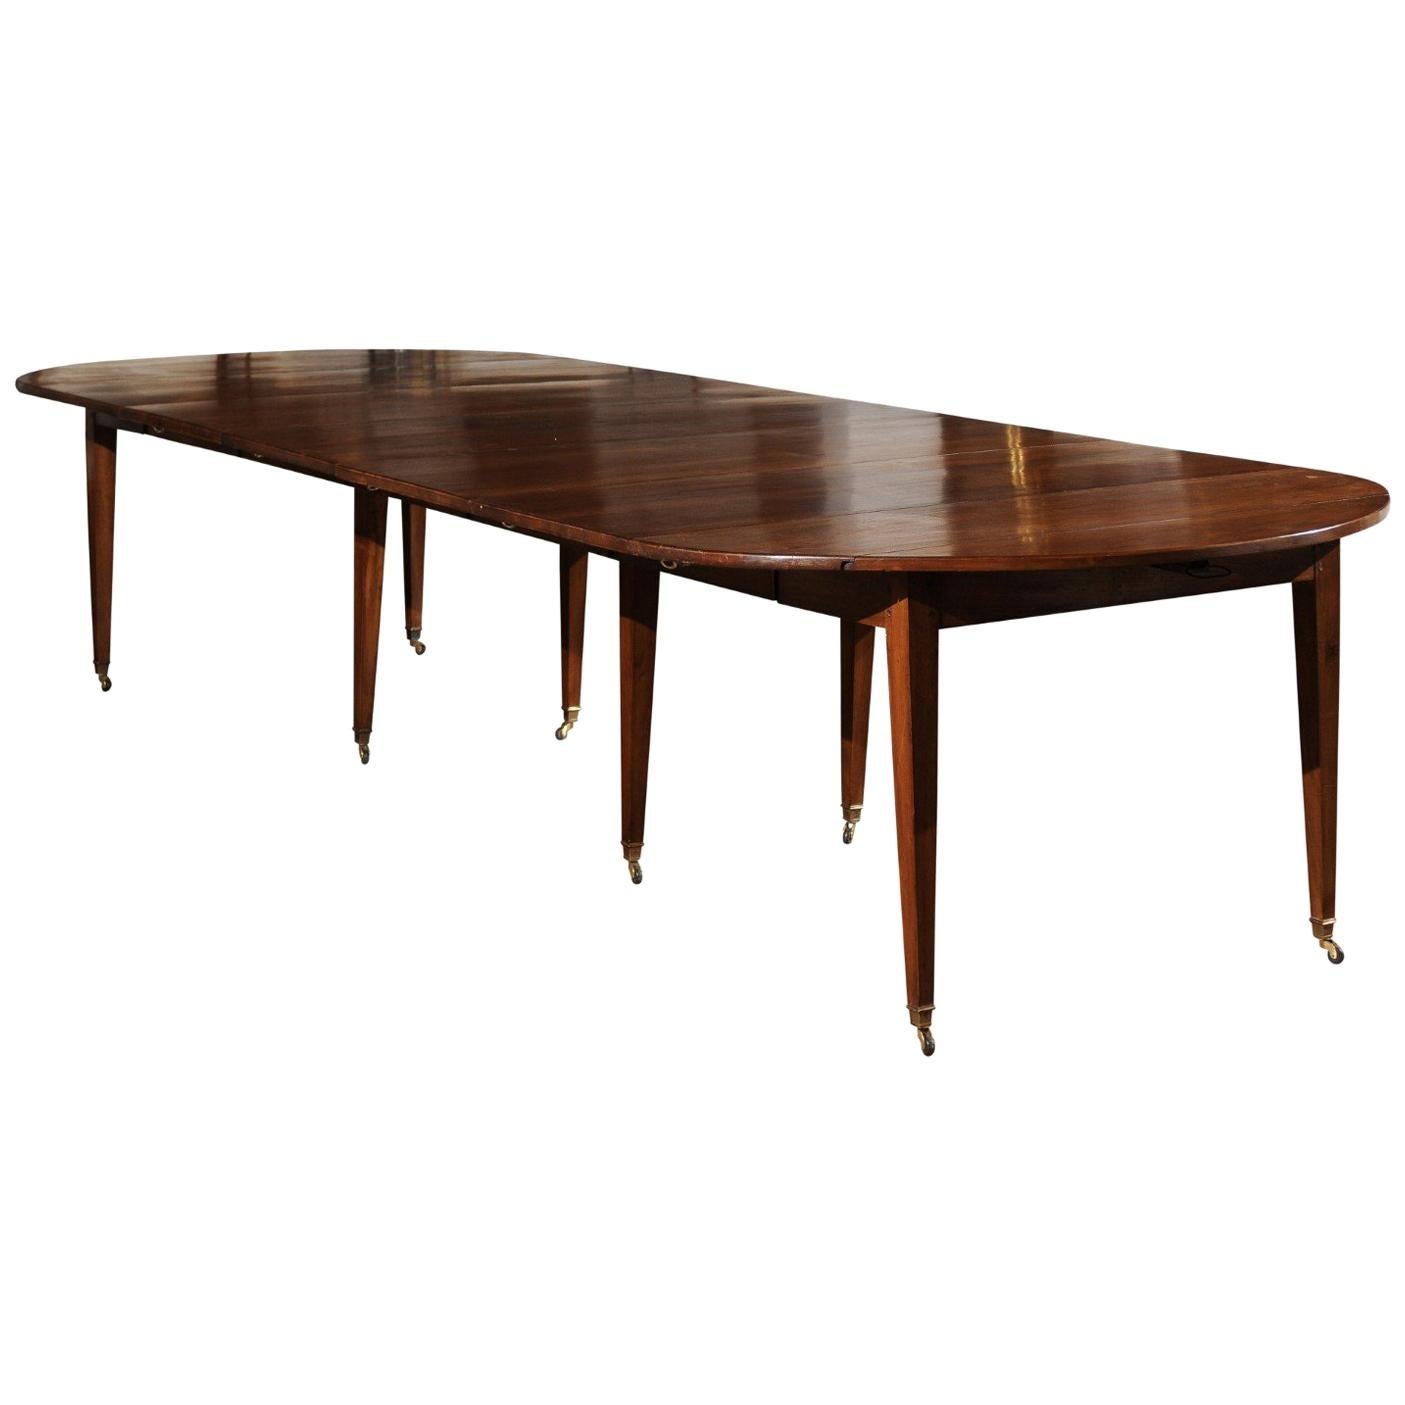 French 19th Century Walnut Oval Extension Dining Room Table with Leaves